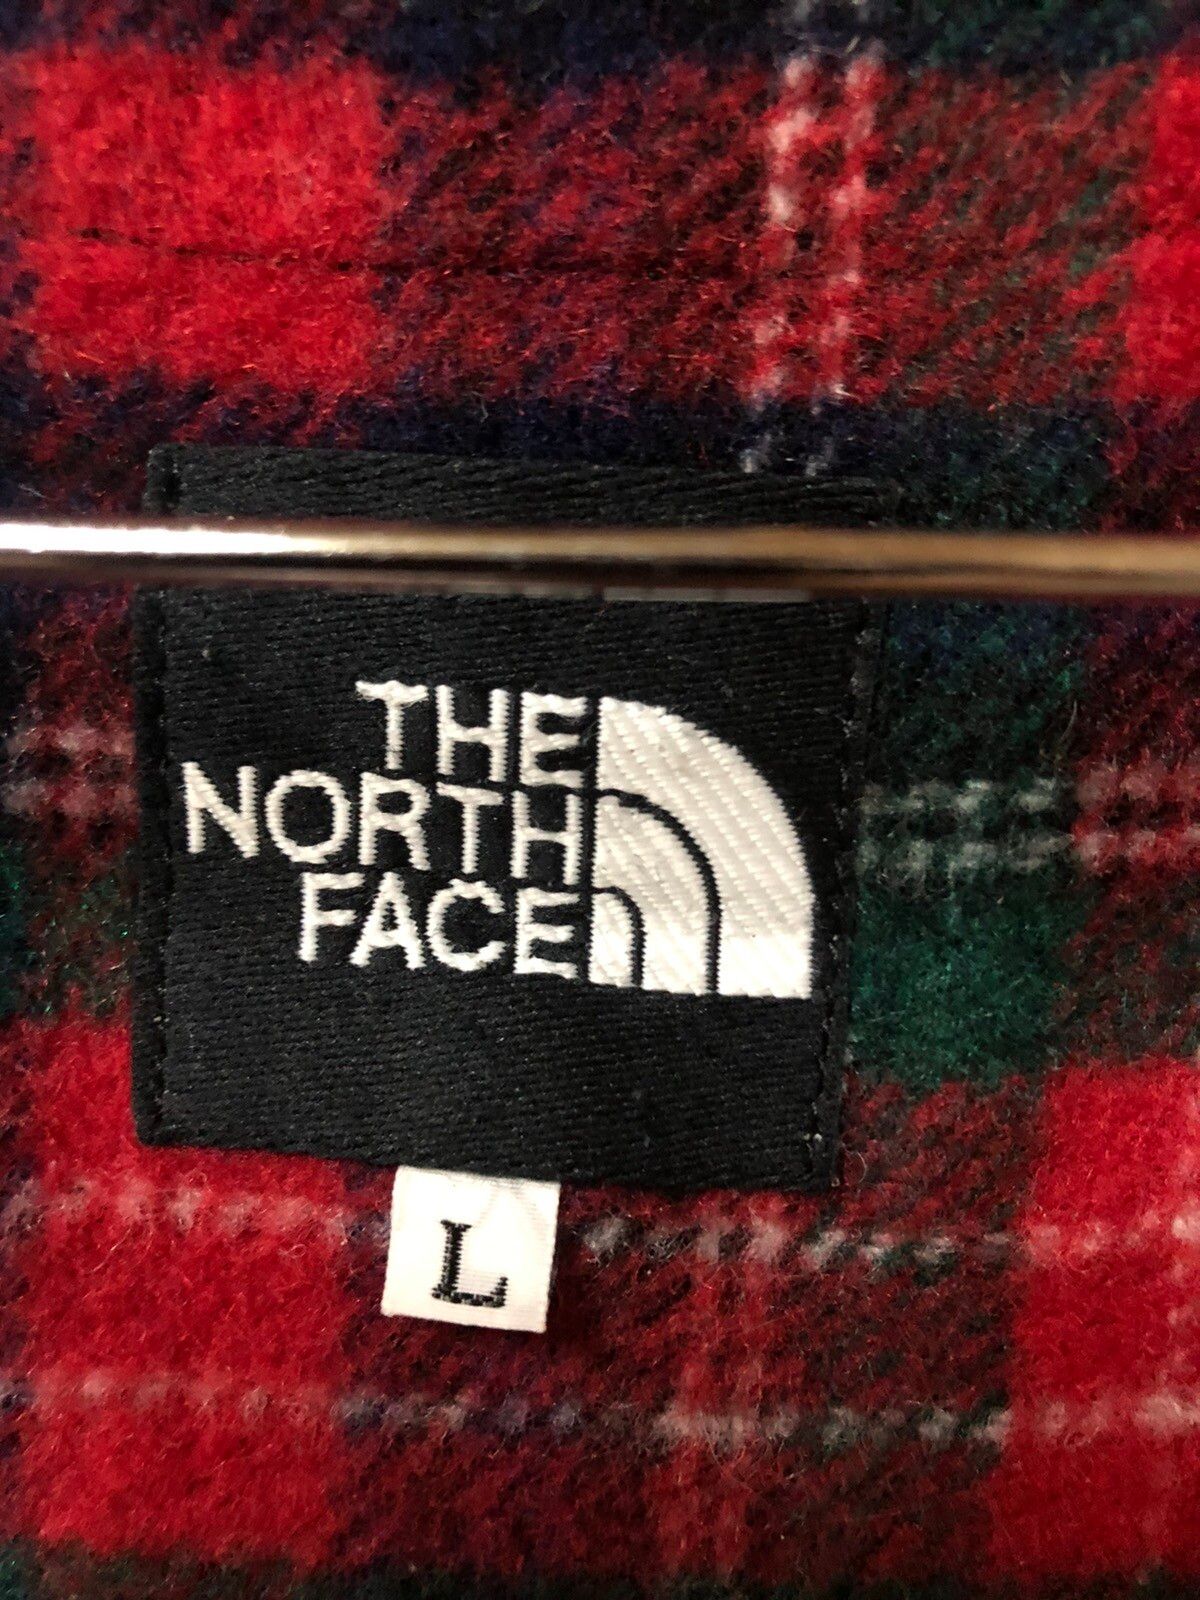 The North Face Vest Jacket Lined Pattern - 7